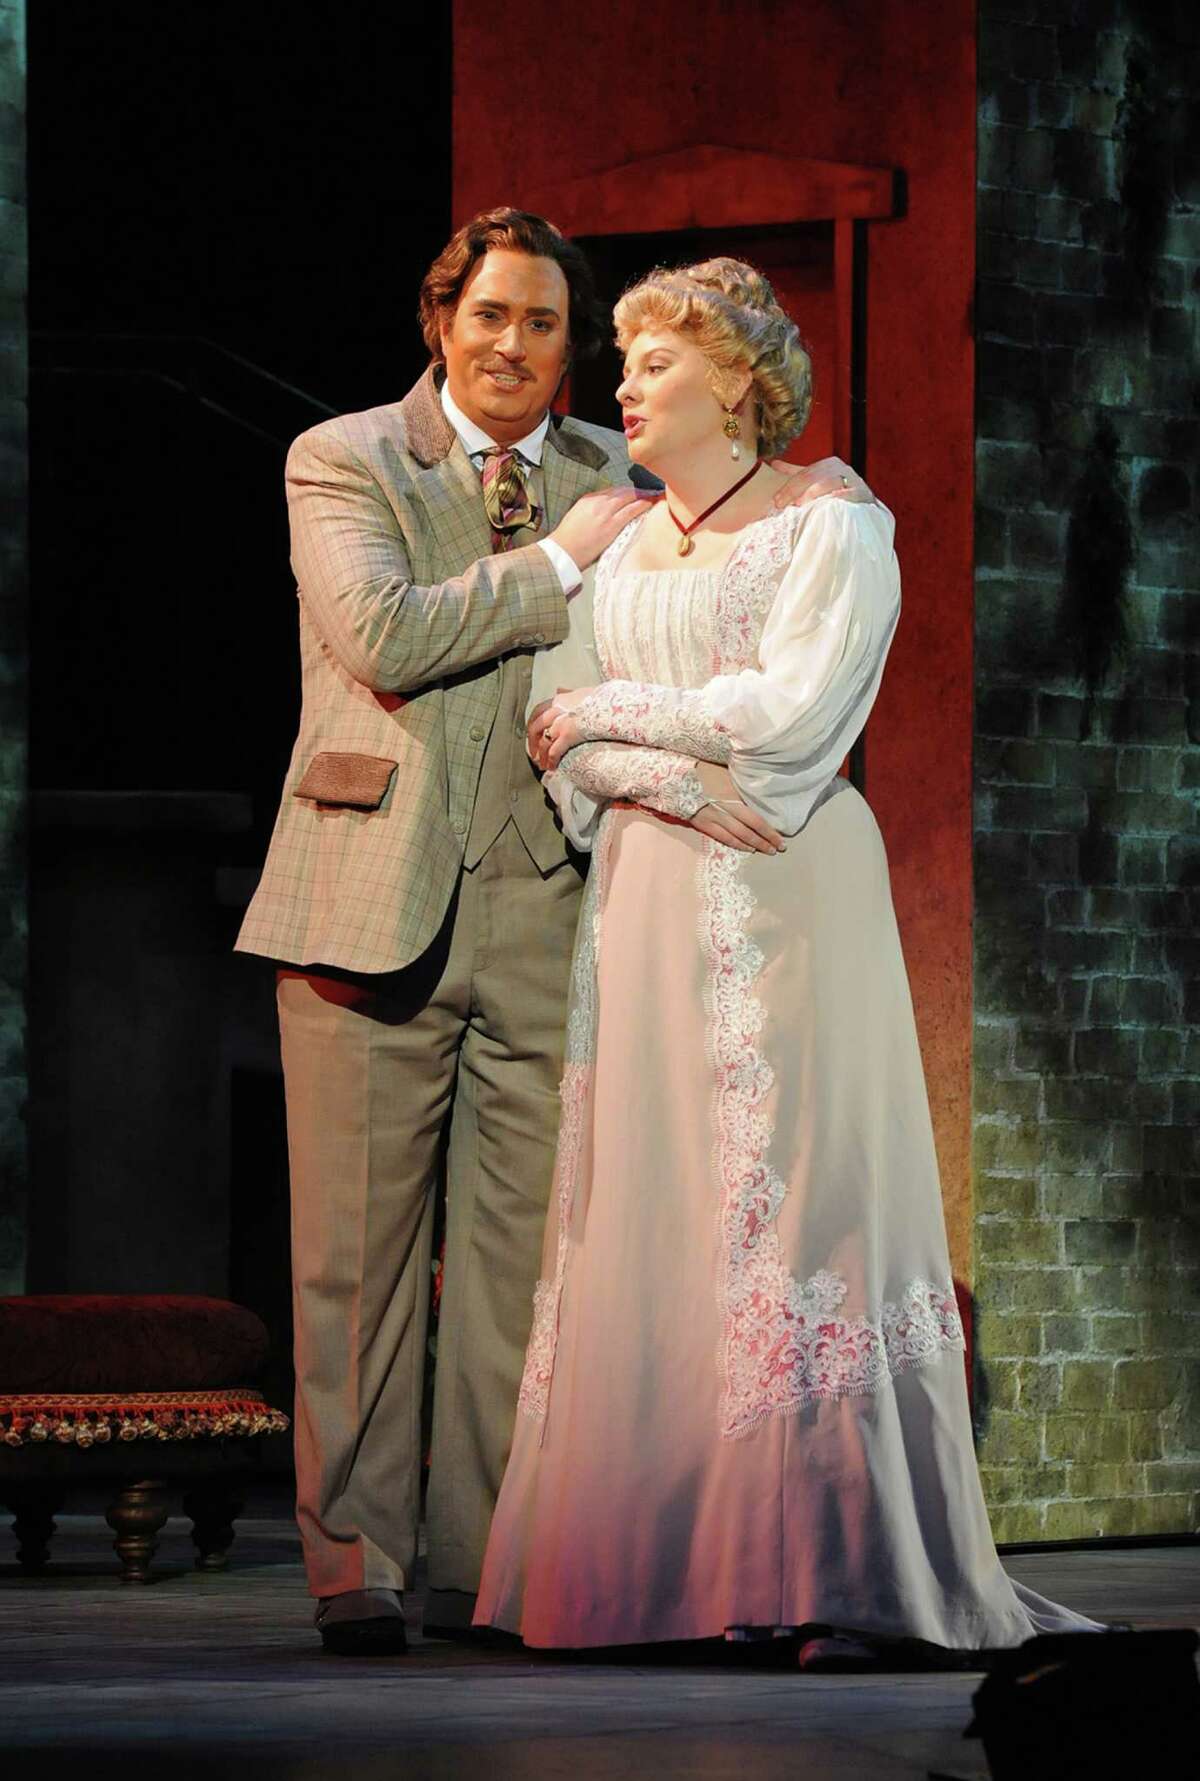 Matthew Hanscom (left) as Gino Carella and Isabella Ivy as Lilia Herriton in “Where Angels Fear to Tread” at Opera San Jose.